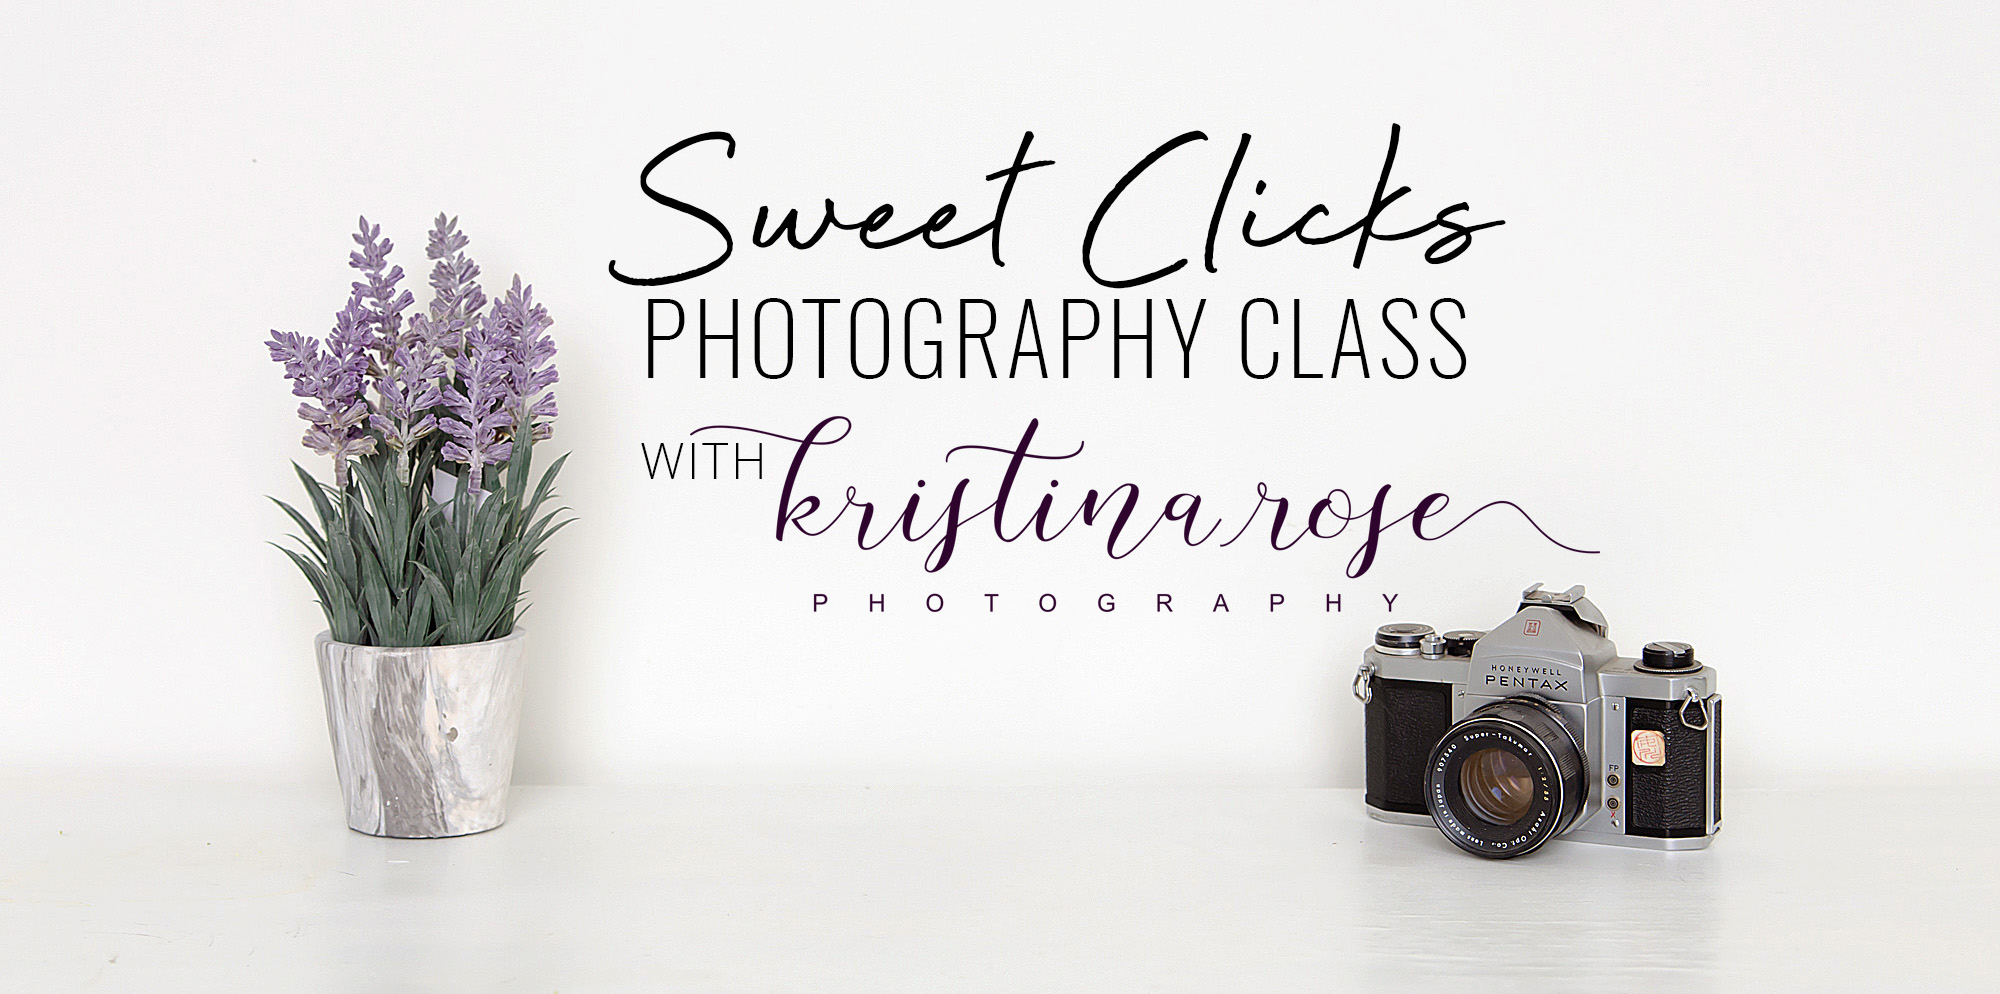 learn basic photography skills with kristina rose photography